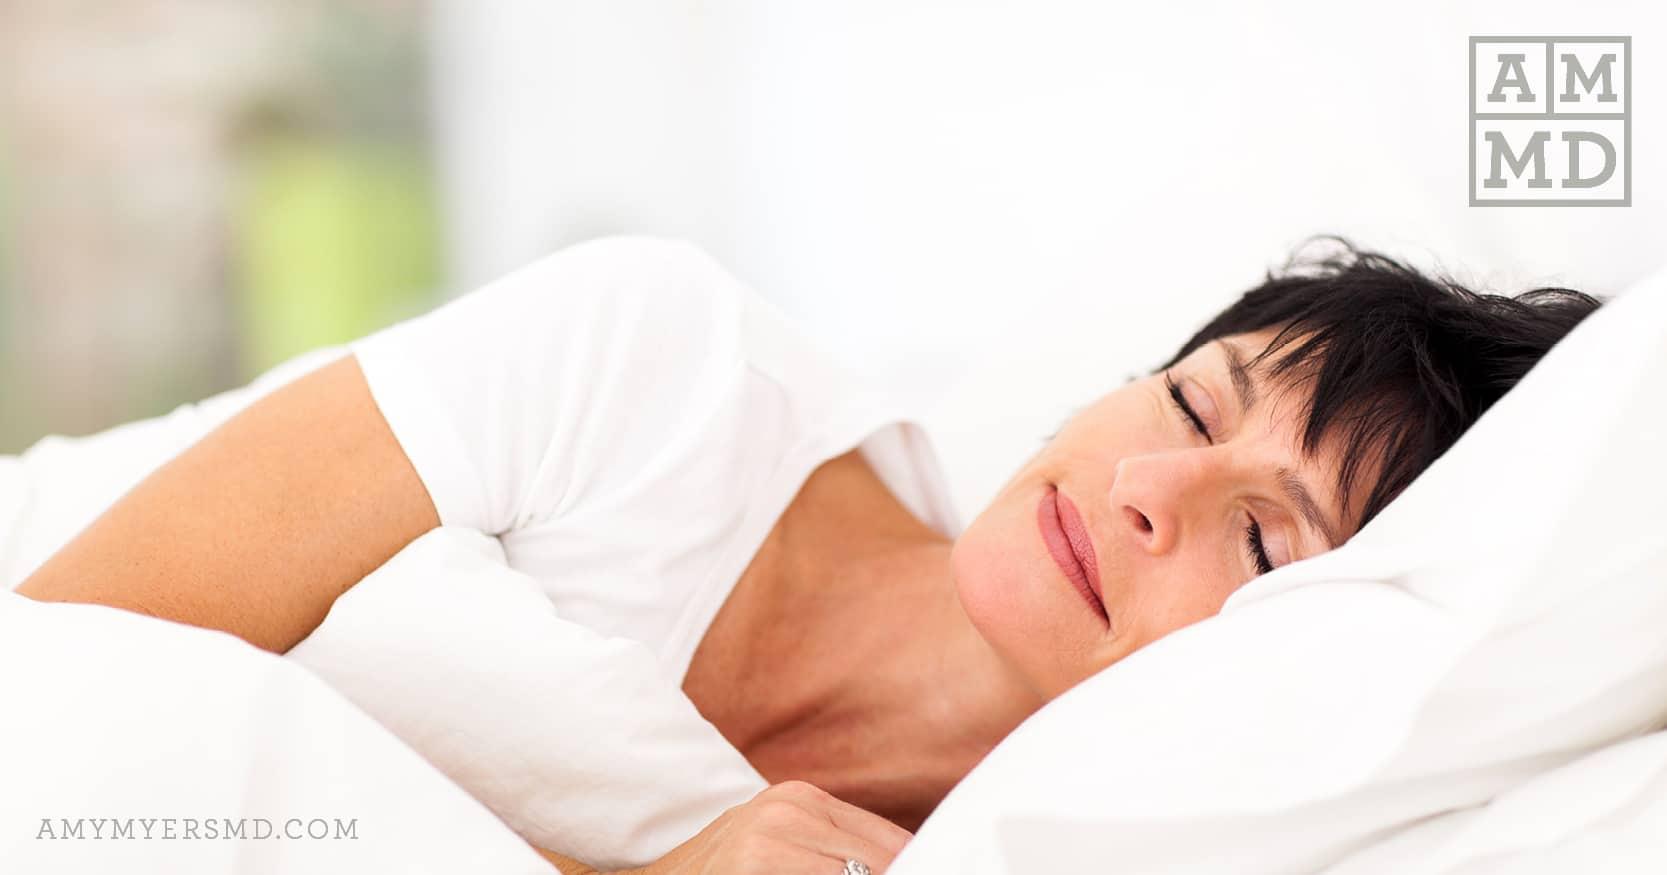 7 Steps to Reset Your Sleep Cycle